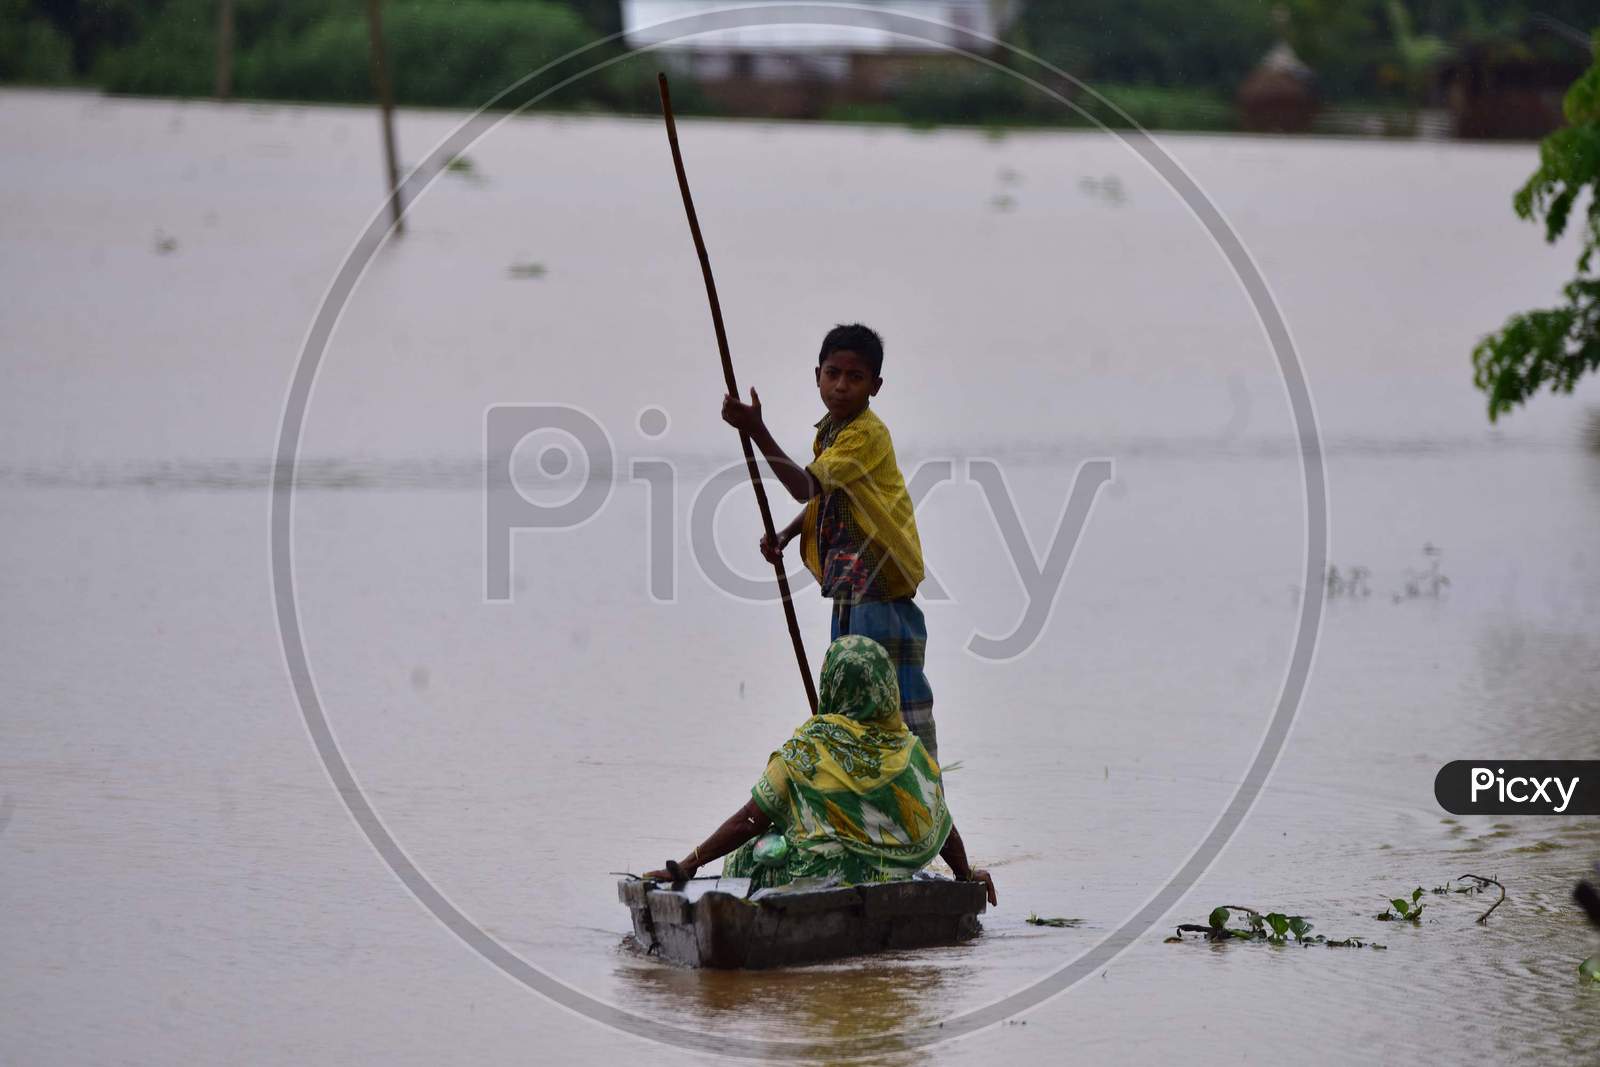 A child uses a makeshift boat to reach a safer place in the flood-affected village in Nagaon, Assam on July 22, 2020